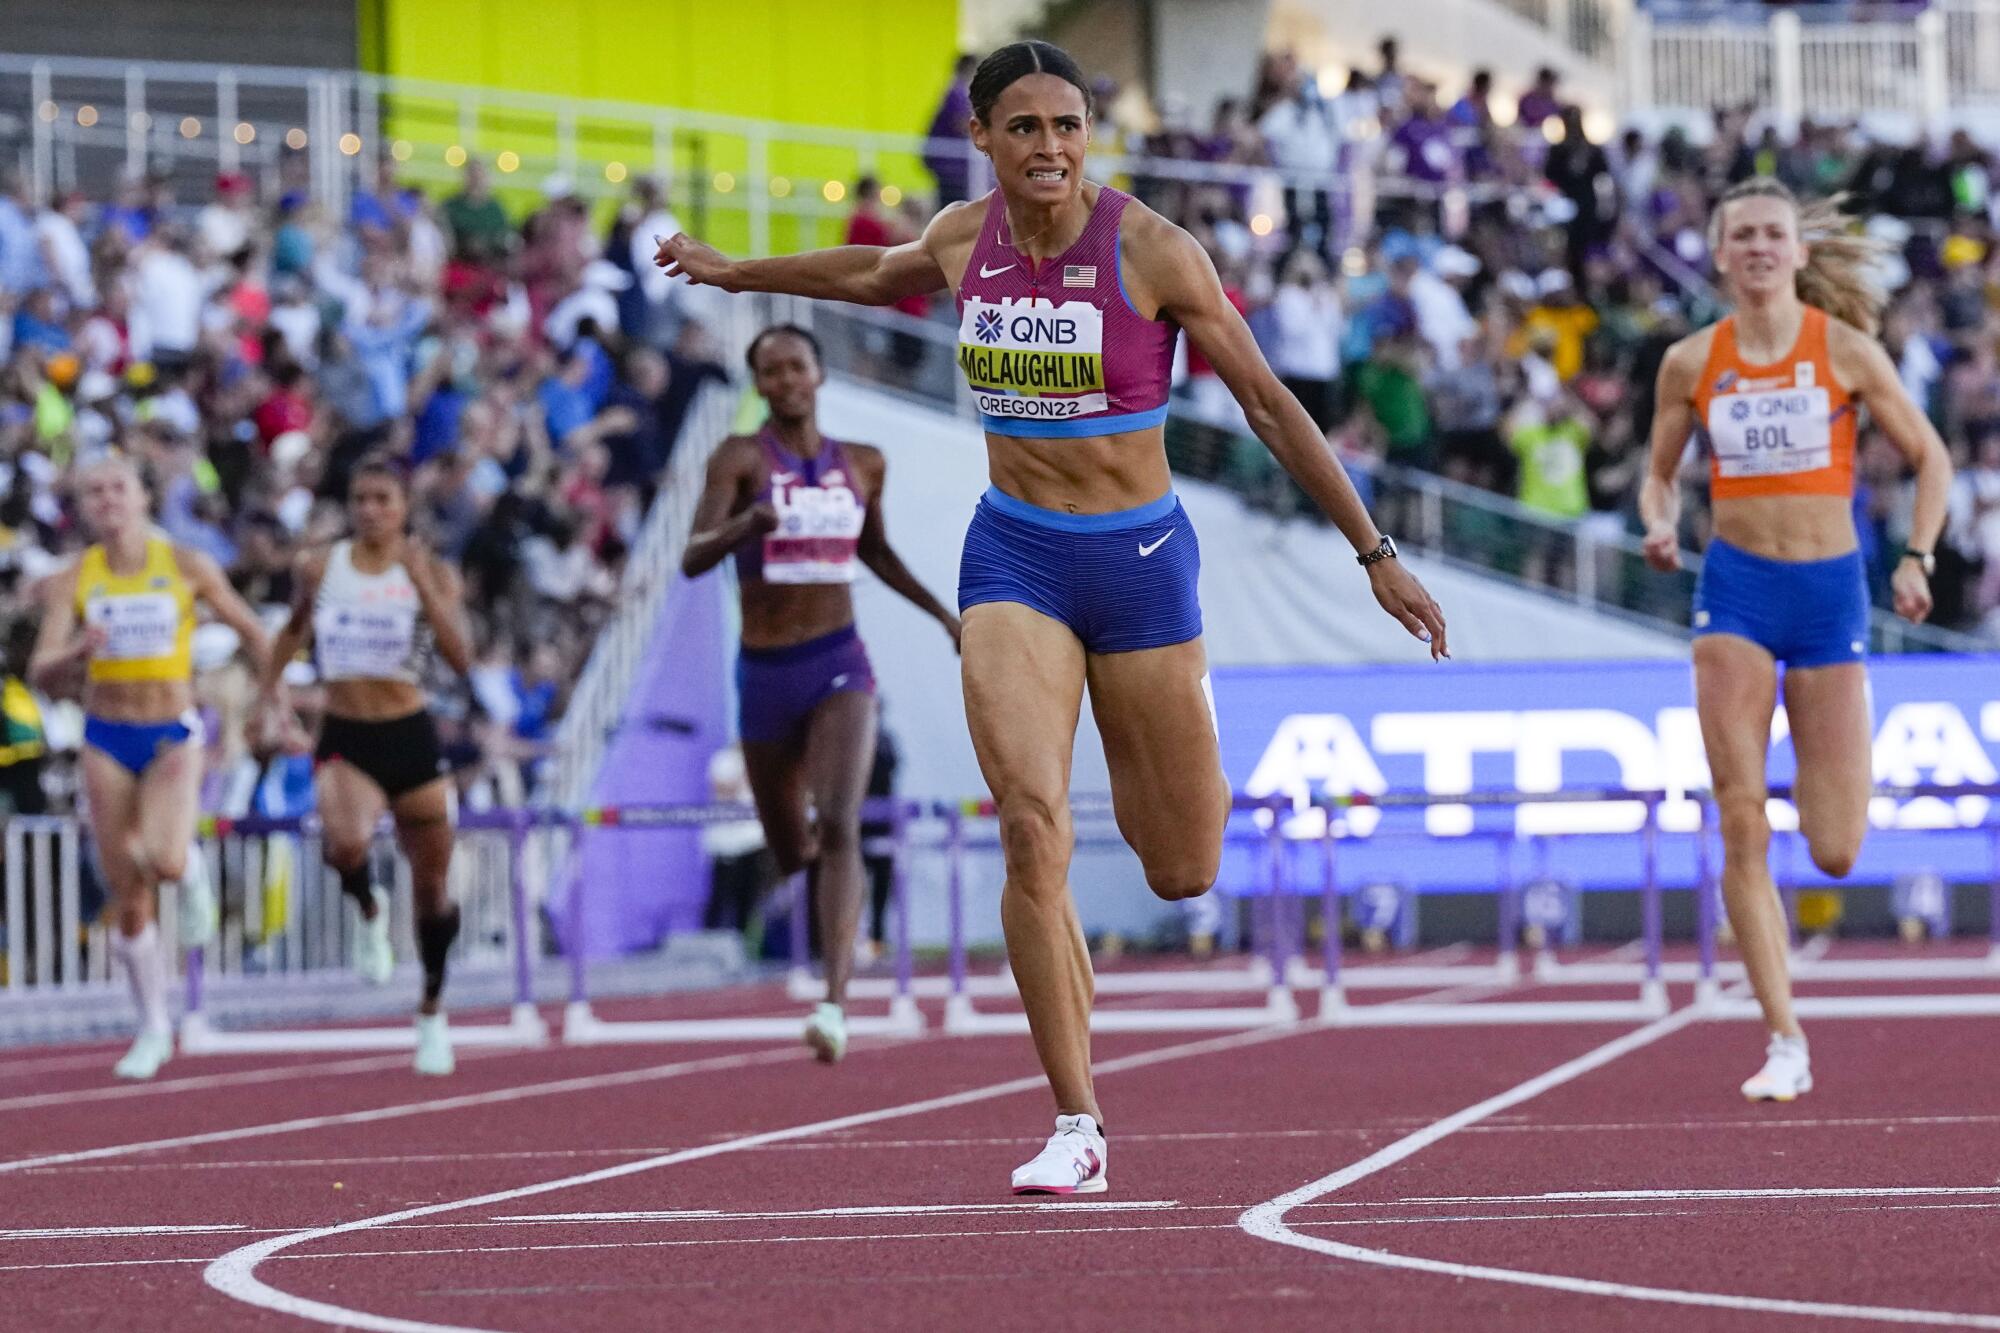 Sydney McLaughlin-Levrone breaks her own world record to win gold in the women's 400-meter hurdles.